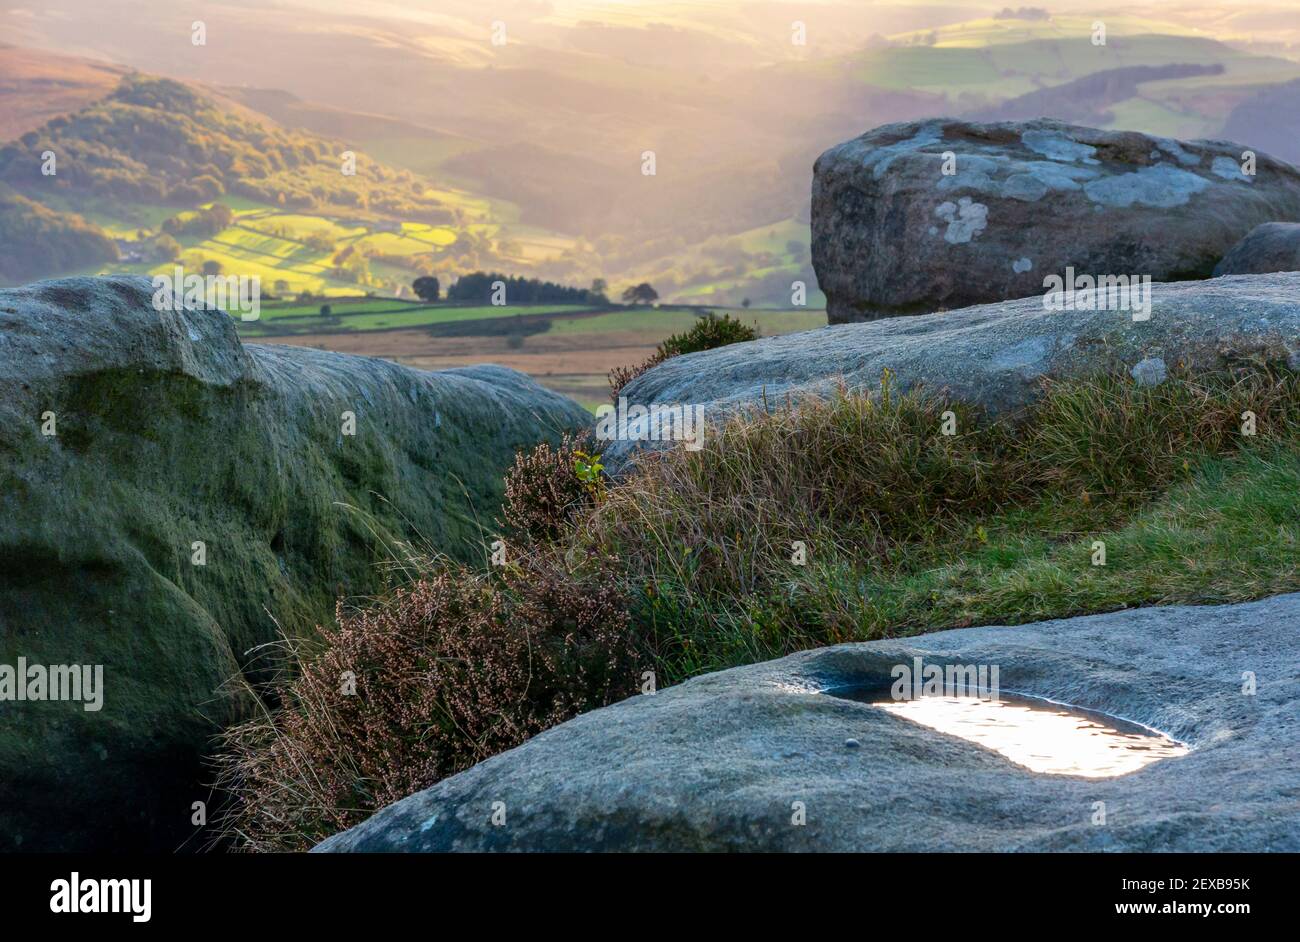 View looking down on the Peak District National Park from Hathersage Moor Derbyshire England UK Stock Photo